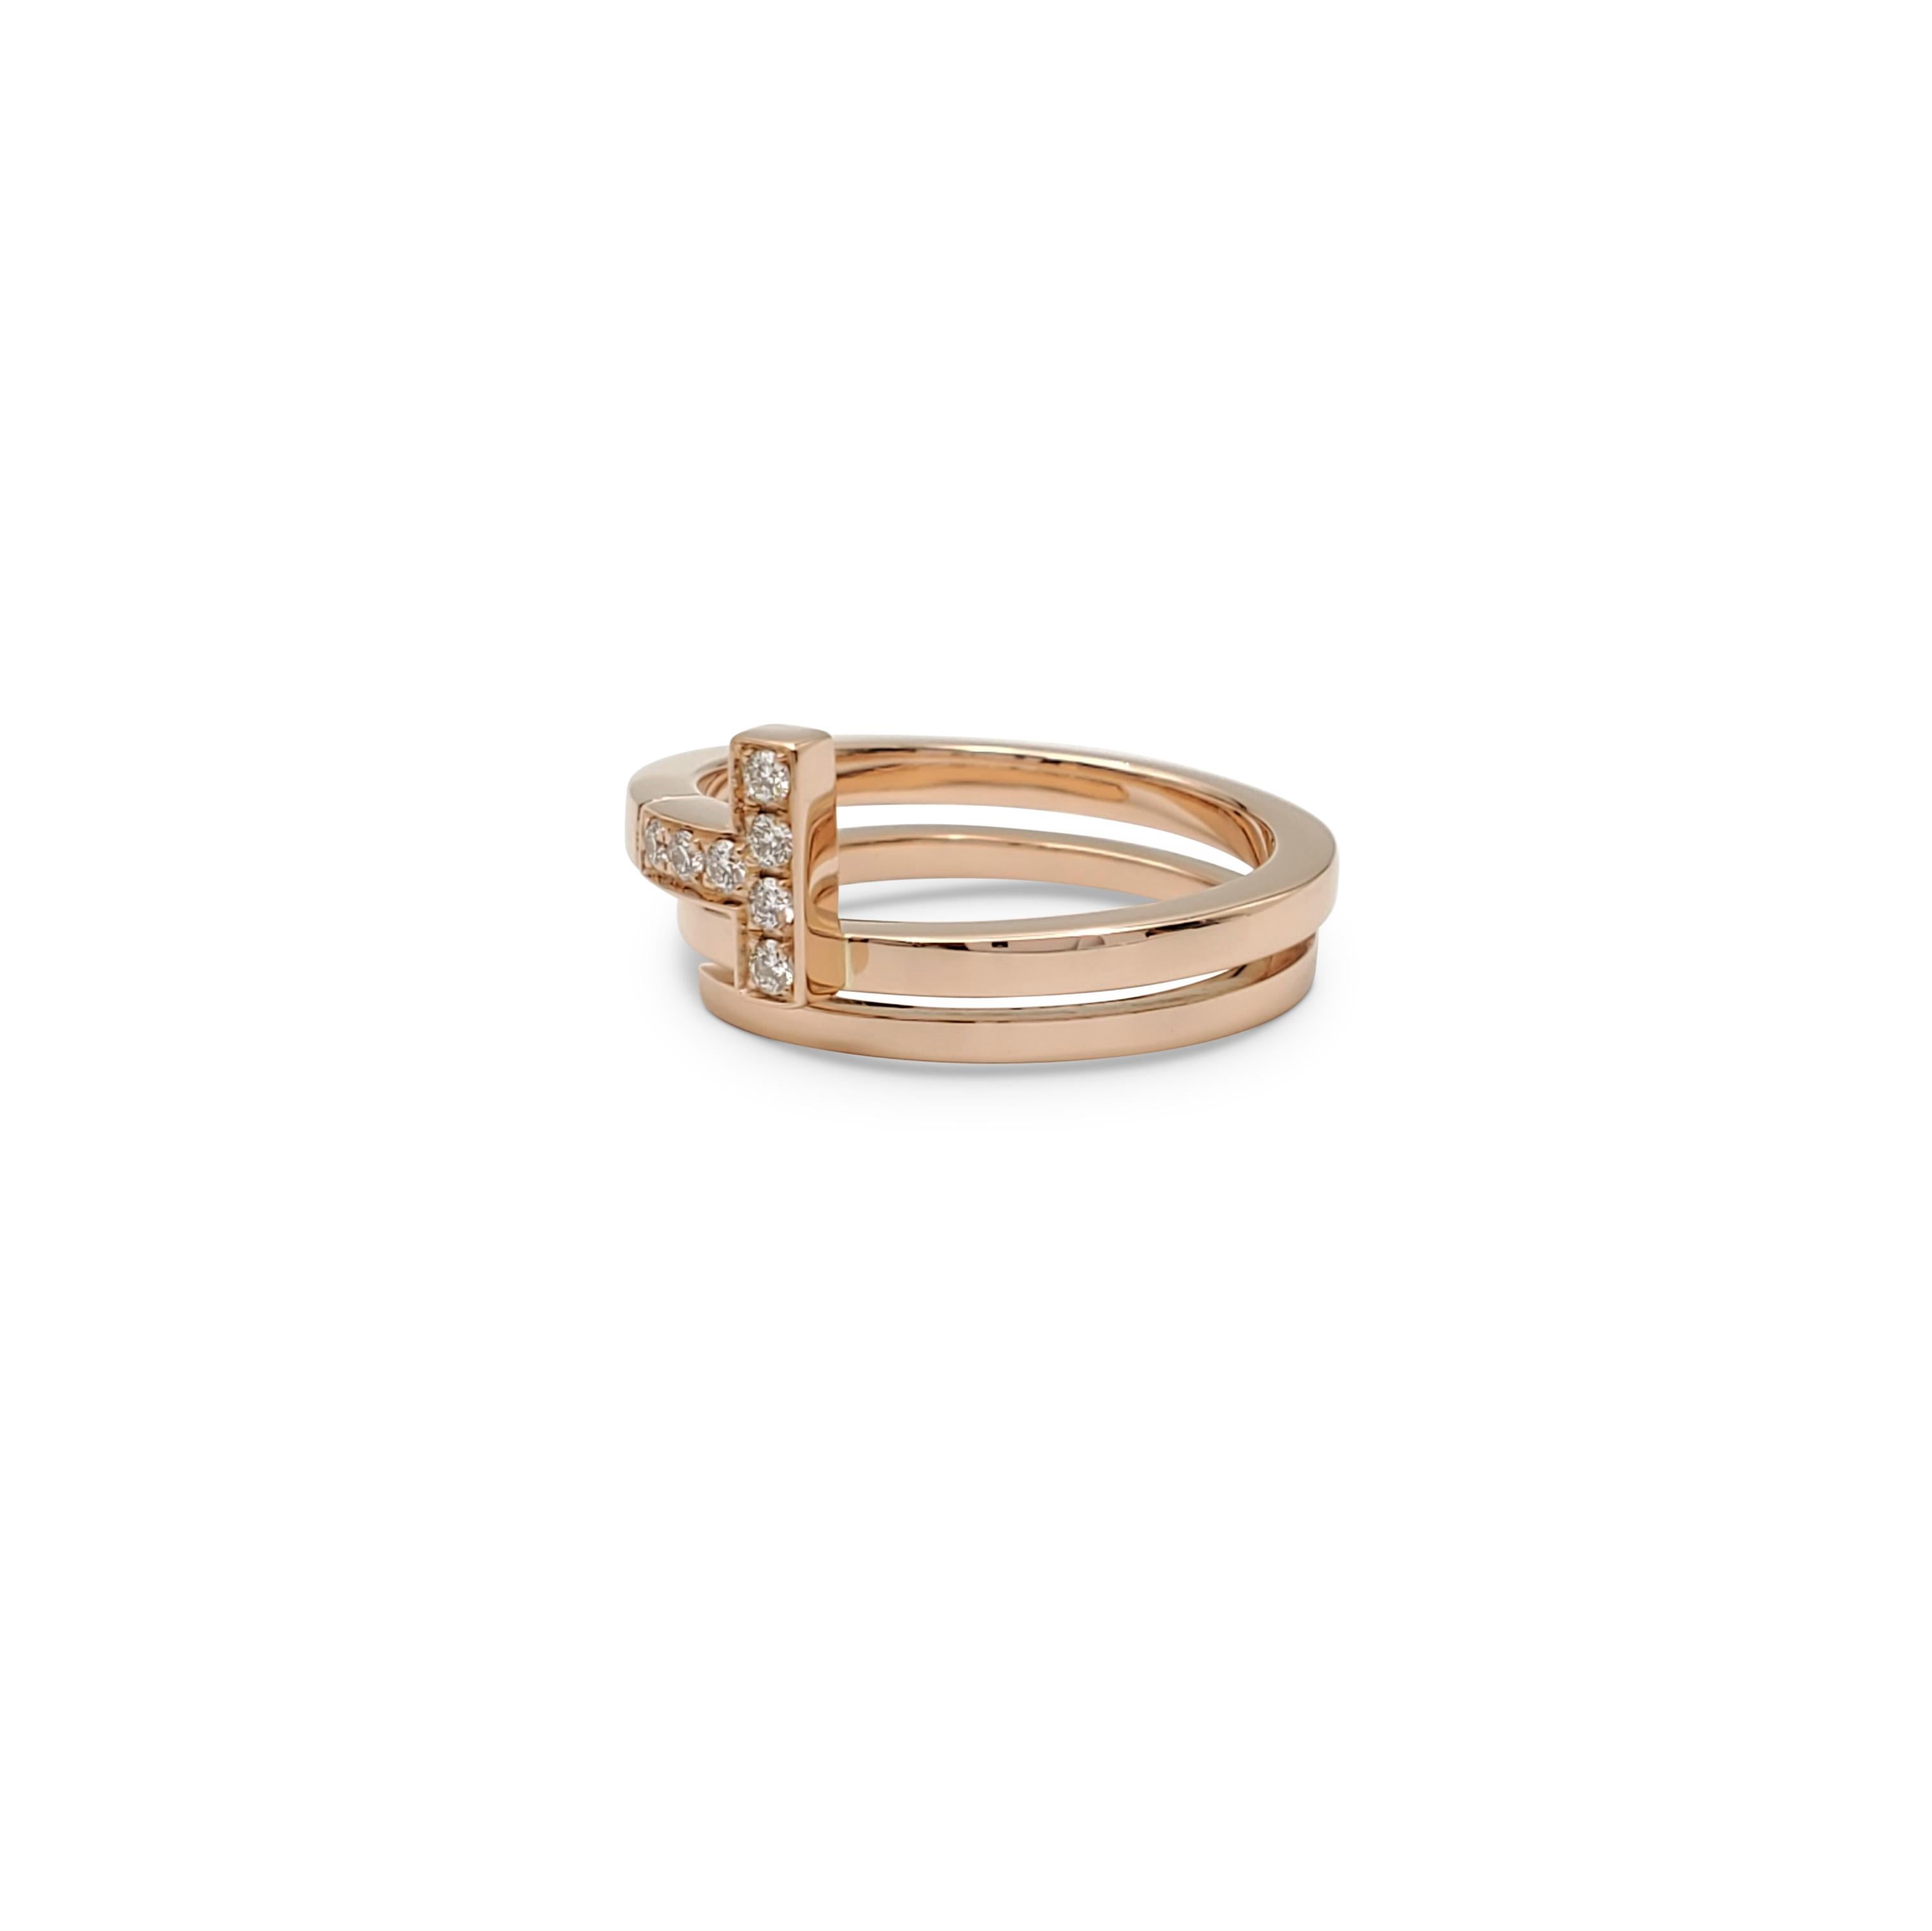 Authentic Tiffany & Co. 'Tiffany T' square wrap ring crafted in 18 karat rose gold and accented with an estimated 0.10 carats of high quality (E-F color, VS clarity) round brilliant cut diamonds. Signed T&Co., Au750, Italy. Ring size 6. The ring is